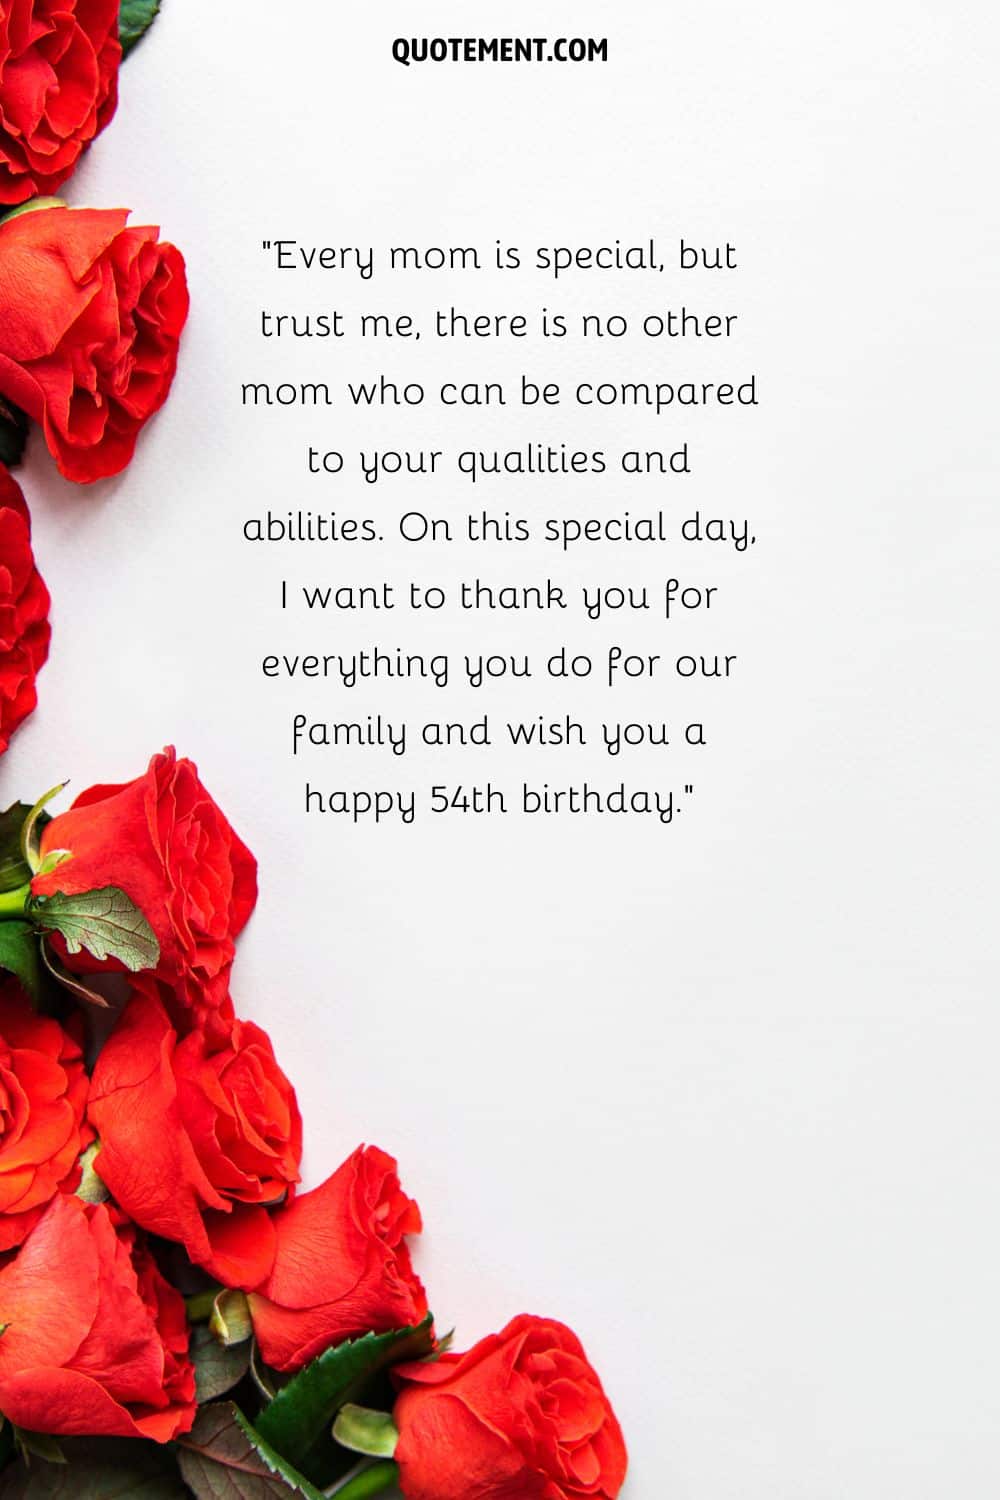 Birthday message for a mom's 54th birthday and red roses on the left
